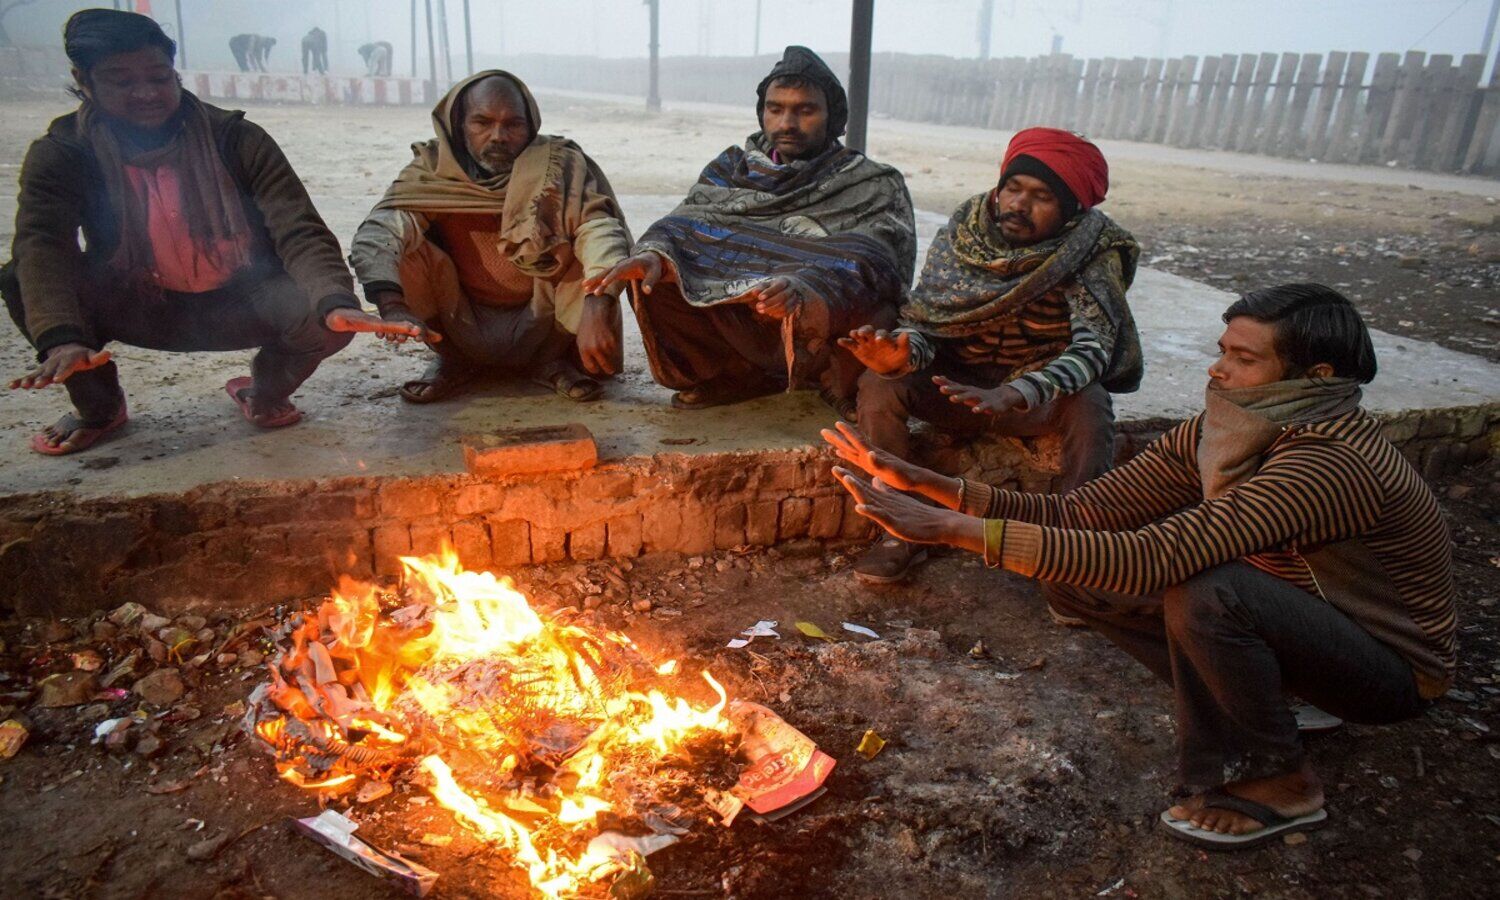 Weather Today: The winter season started increasing in UP and Bihar, rain will continue to be a problem in these areas